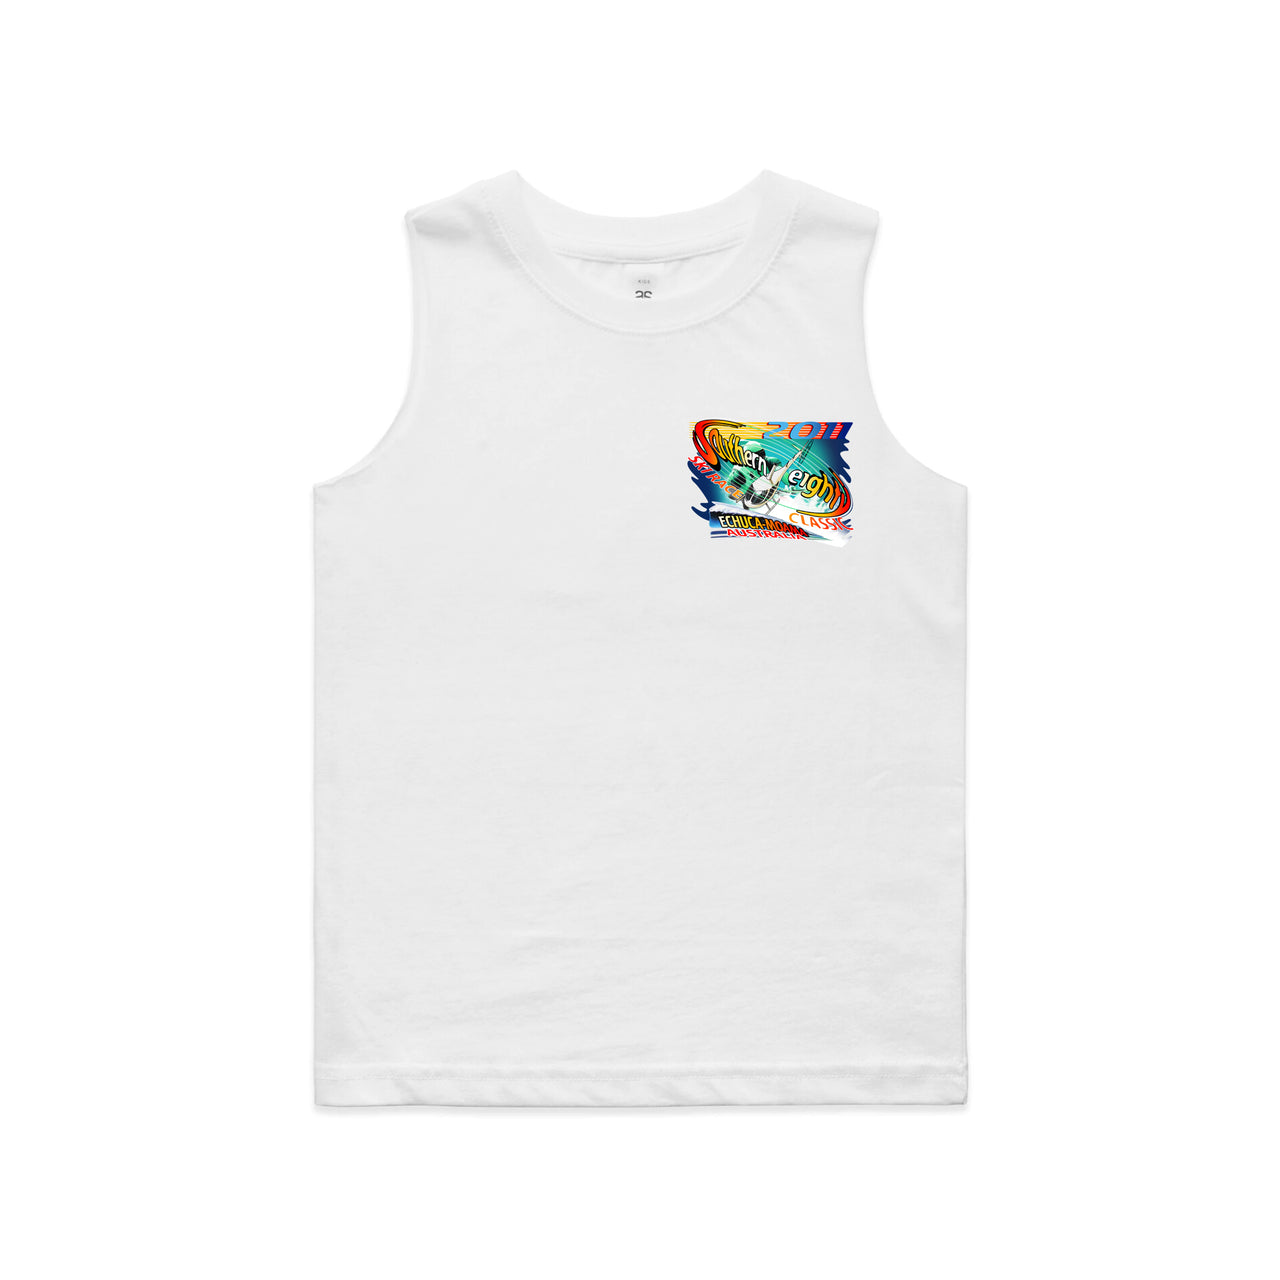 S80 2011 Hellrazor Event Youth/Kids Tank